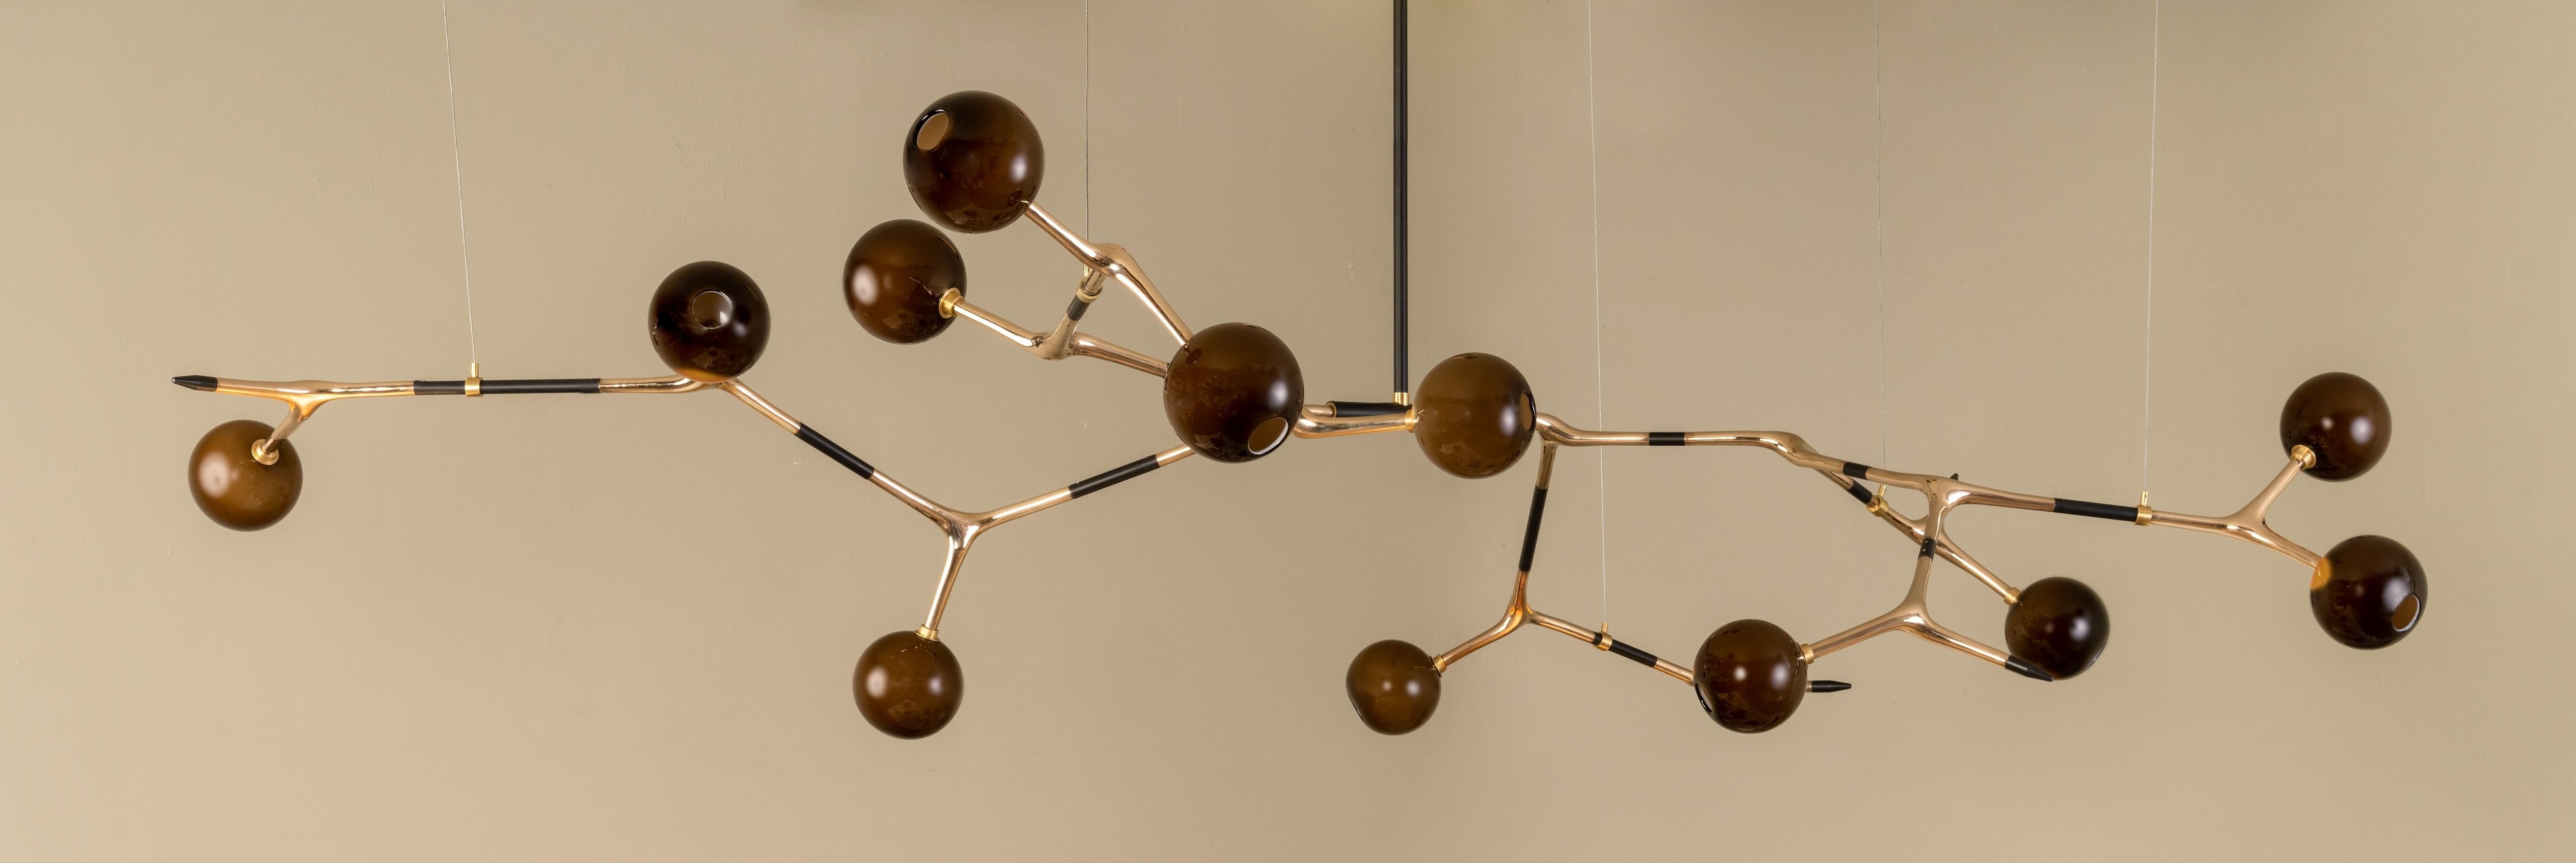 Coffee and Polished Bronze Mantis 13 Pendant Lamp by Isabel Moncada
Dimensions: Ø 280 x H 145 cm.
Materials: Cast bronze, blown glass and turned brass.
Weight: 17 kg.

Just like the insect it shares its name with, this piece is elongated with fluid